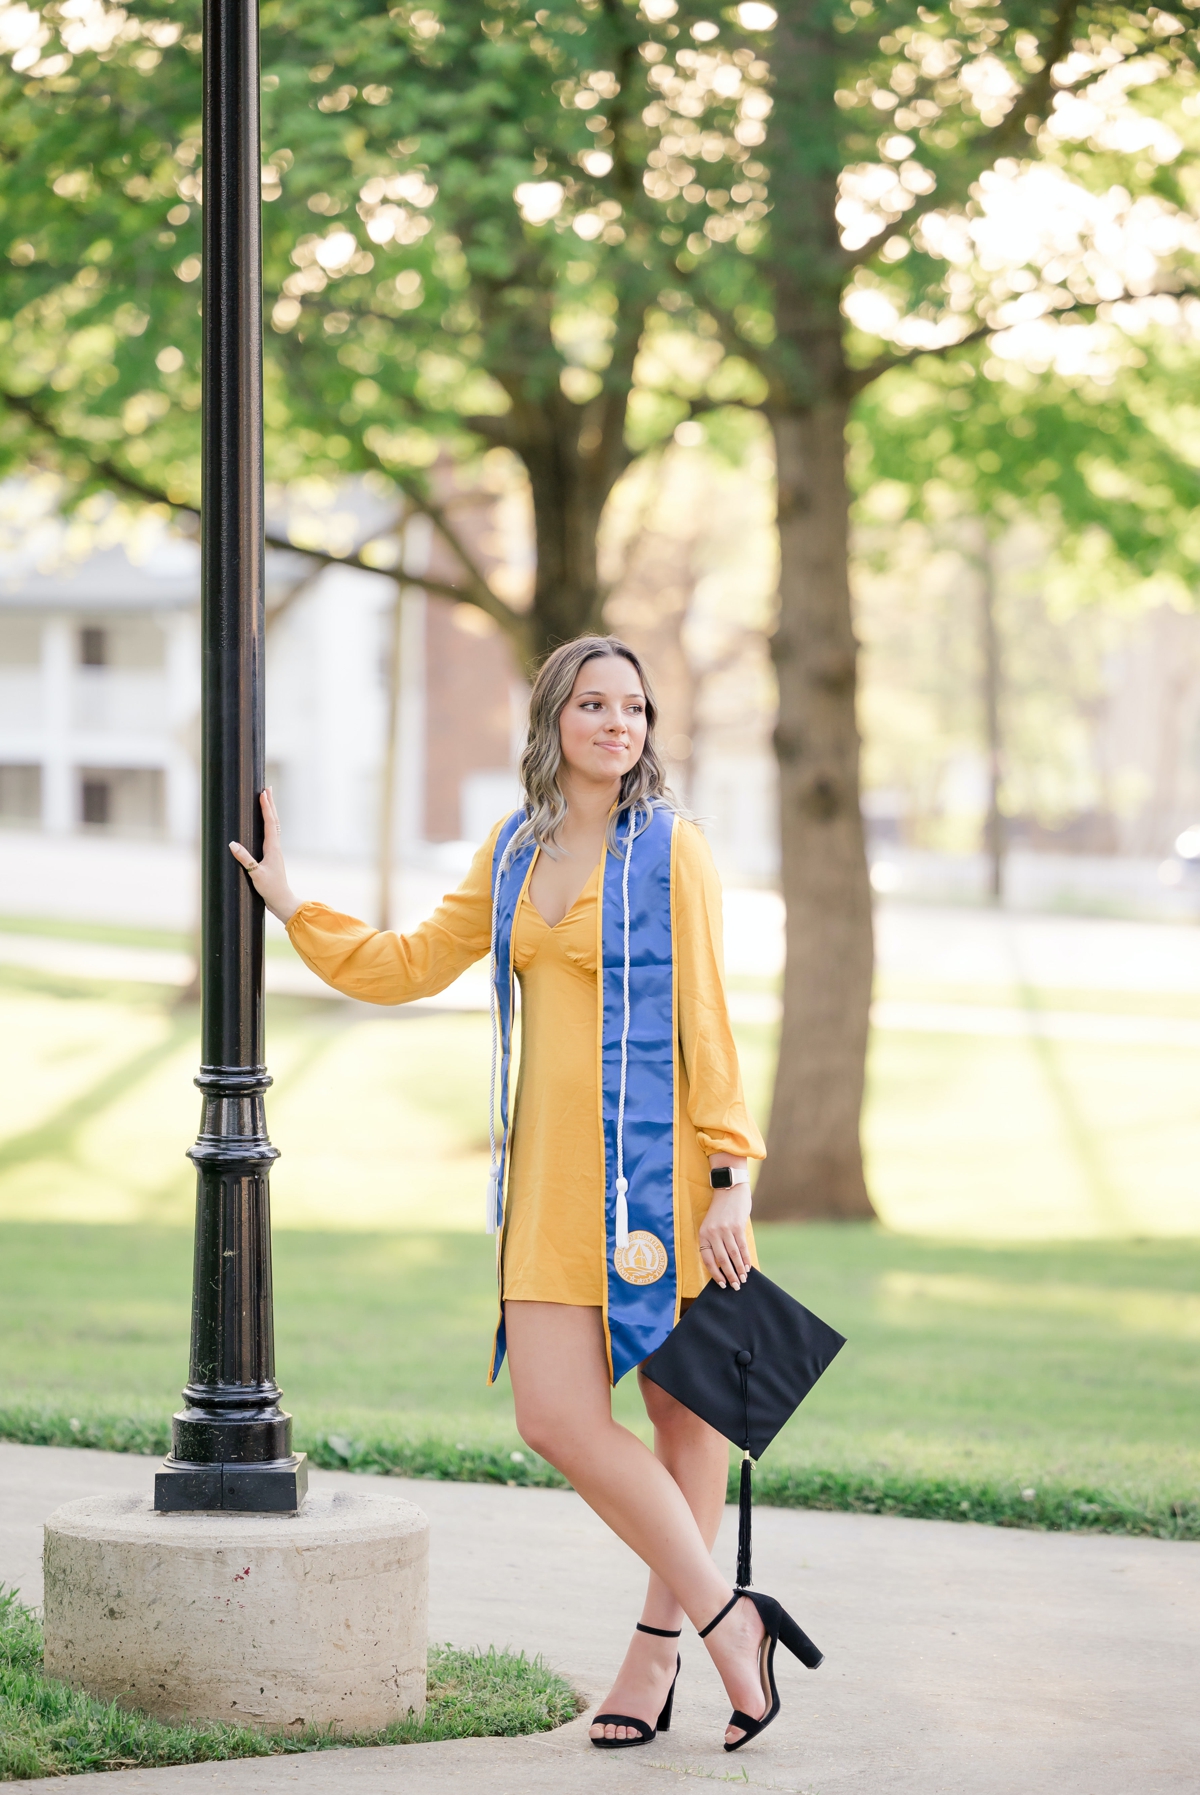 A woman in a yellow dress leaning against a lamp post during her graduation session.